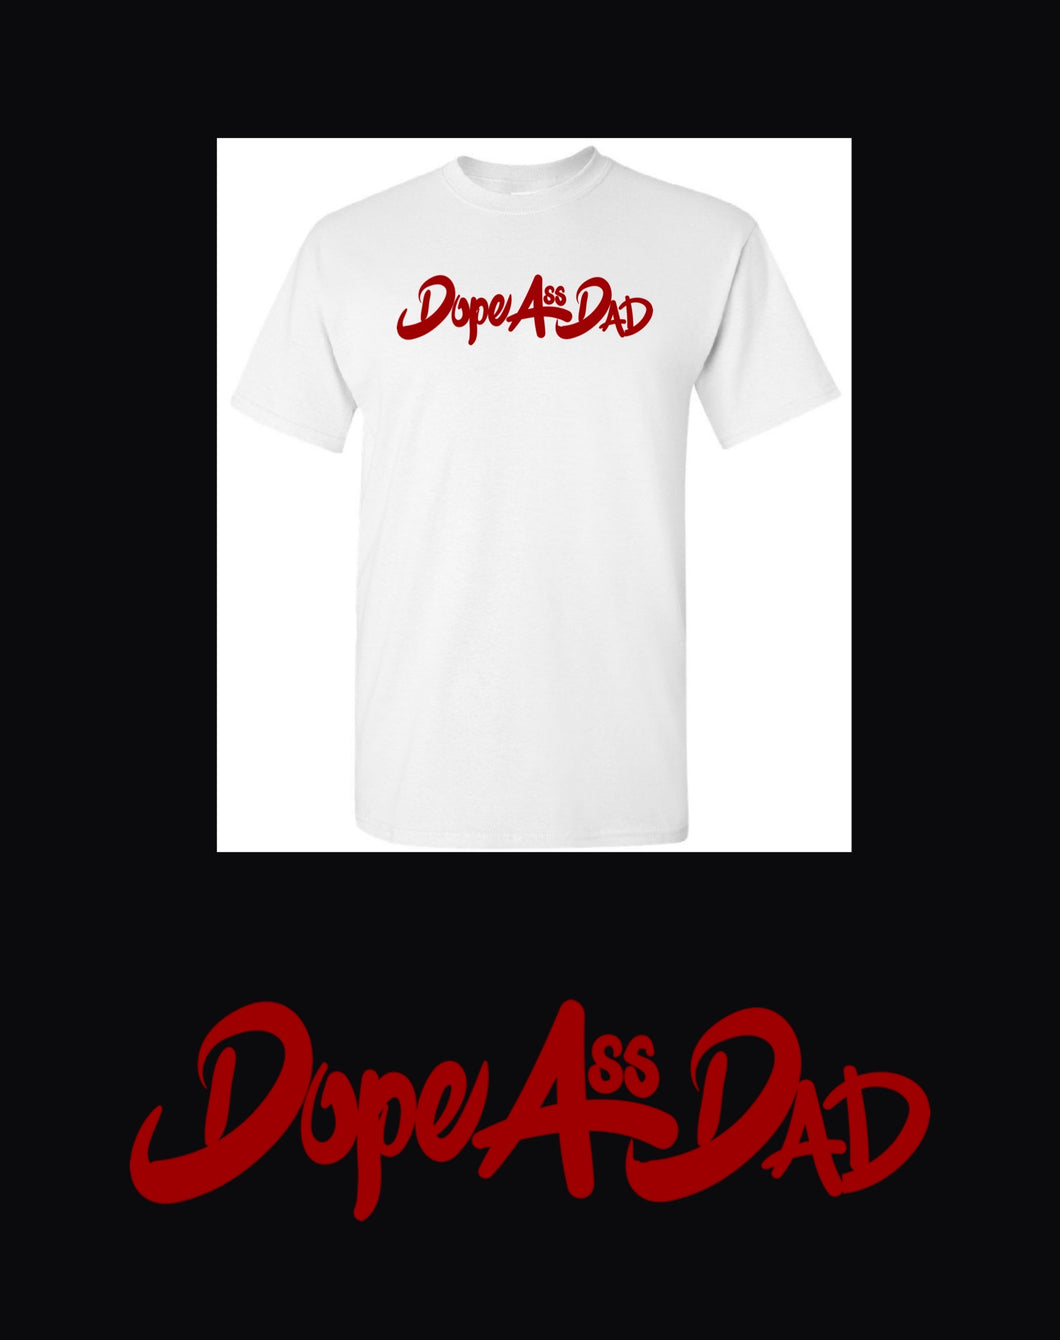 The Basic Dad Shirt (White/Red)